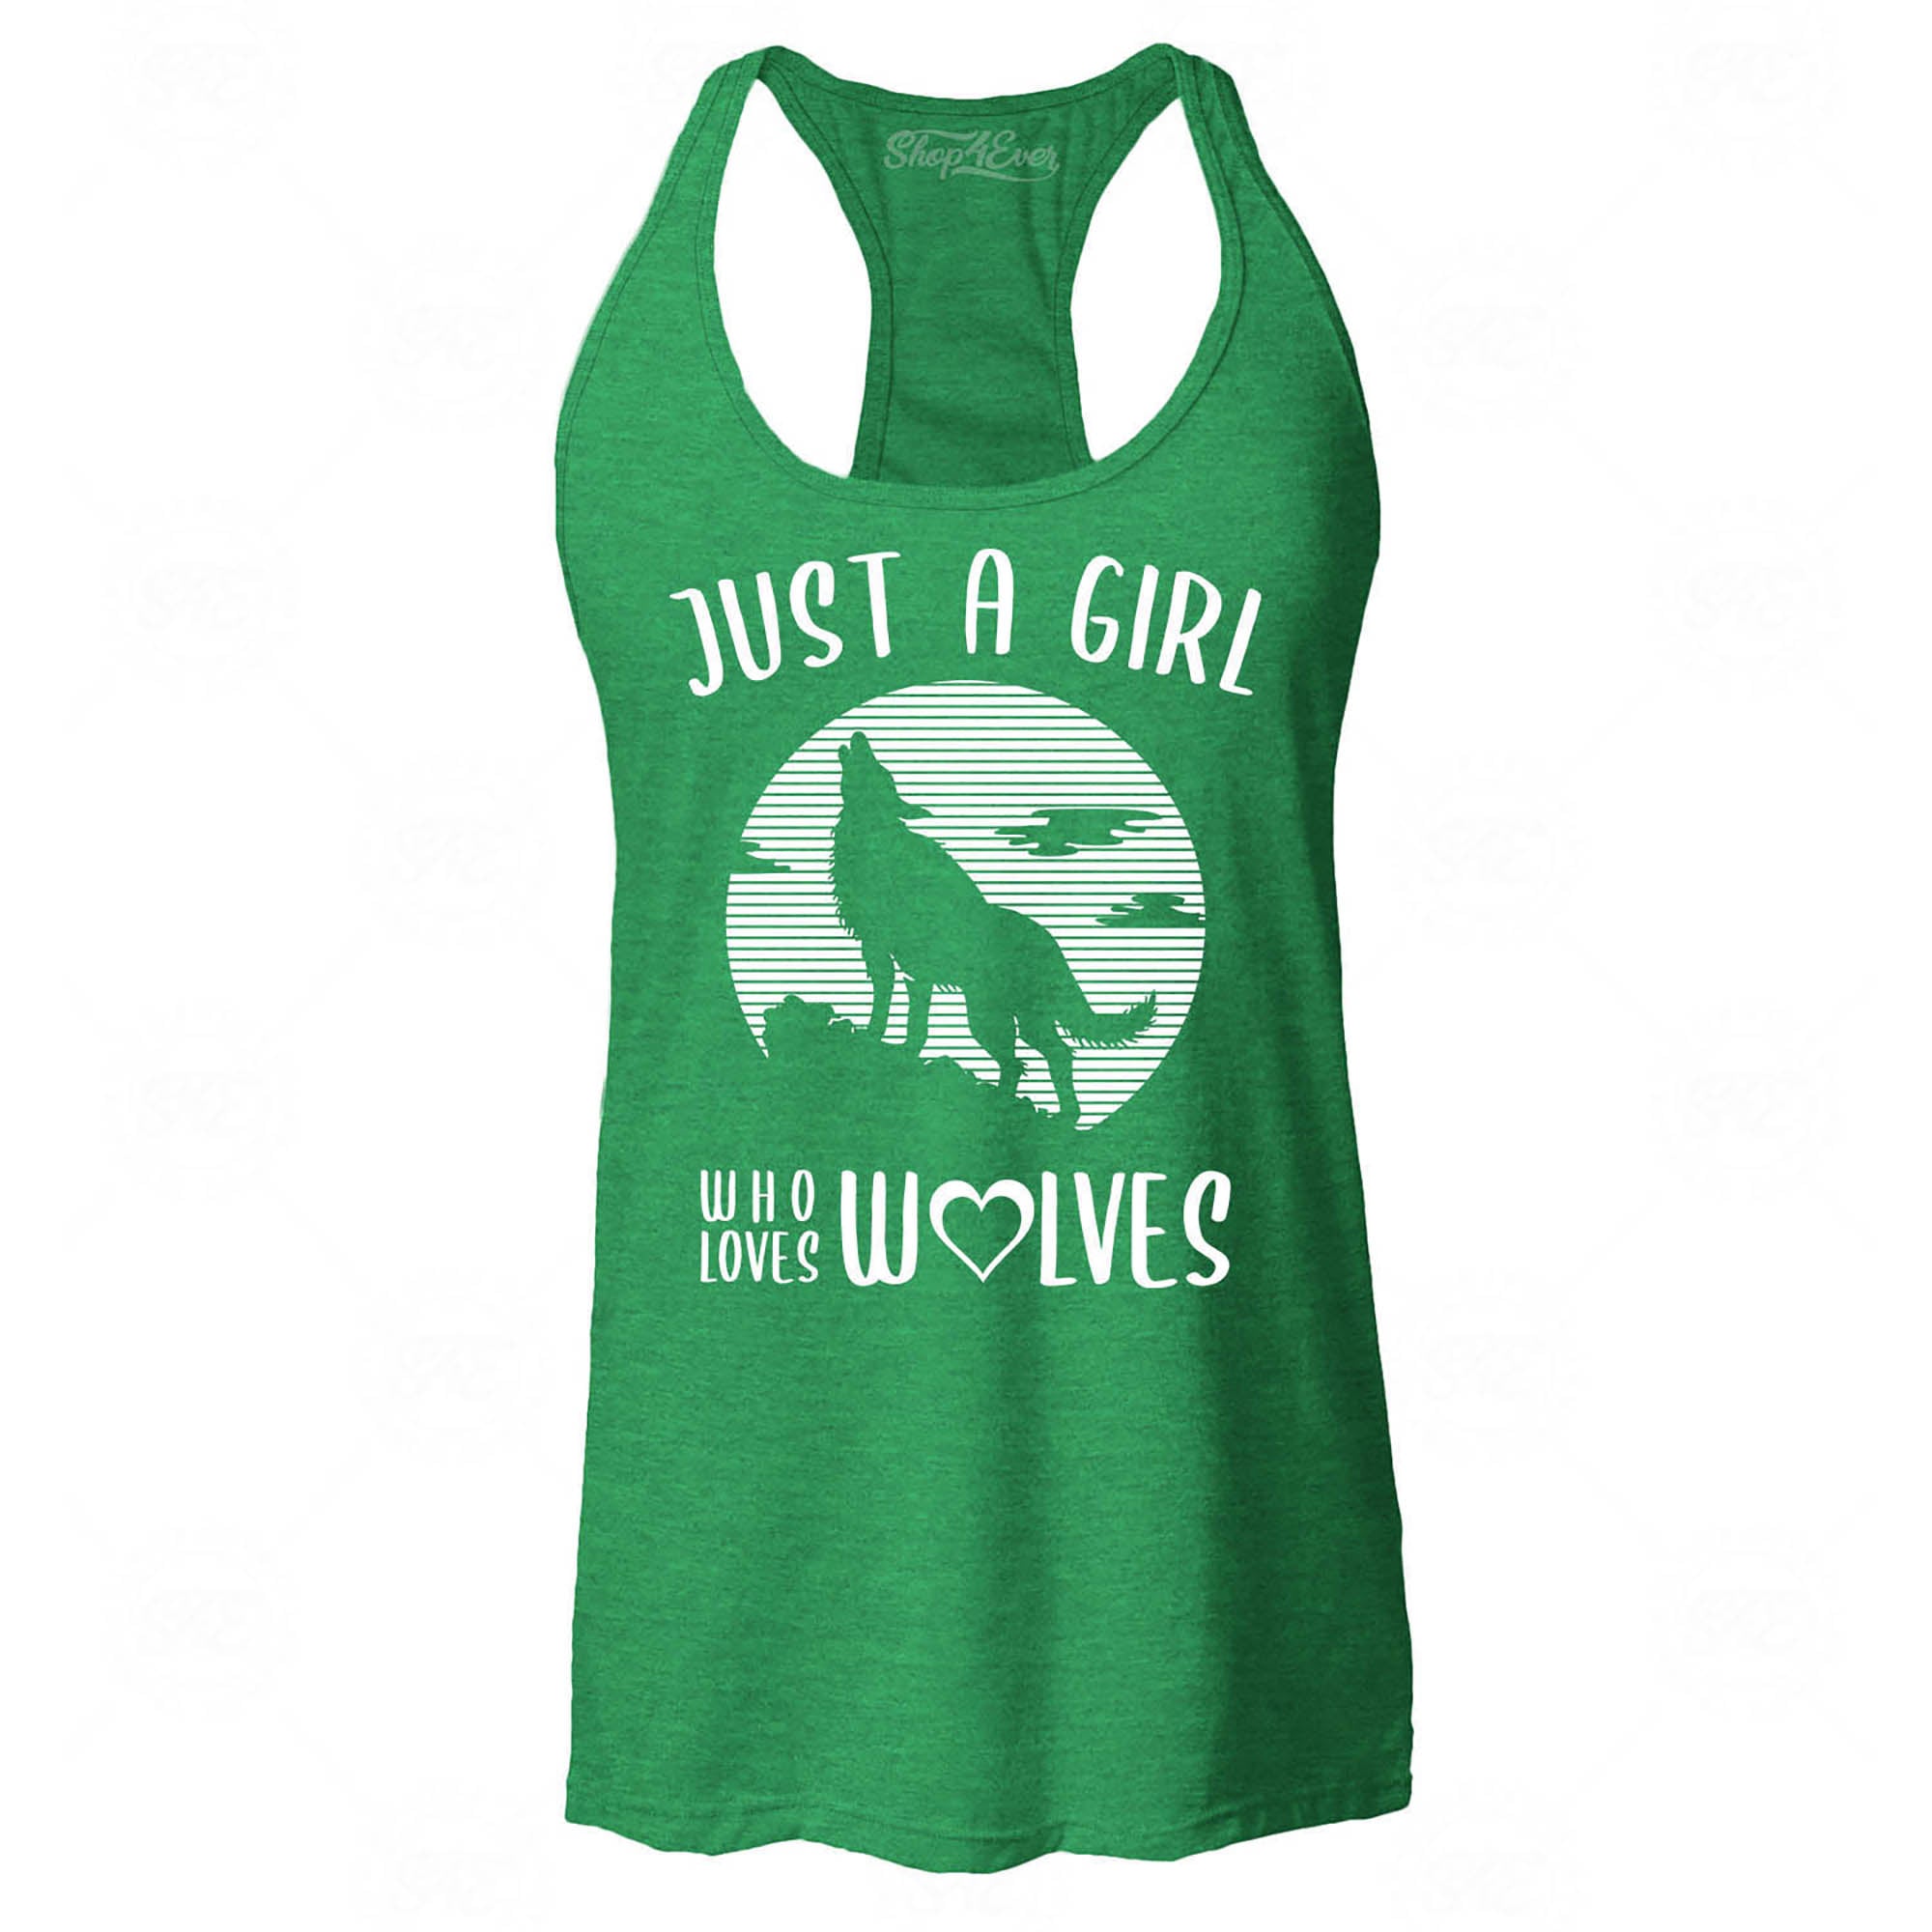 Just A Girl Who Loves Wolves Women's Racerback Tank Top Slim Fit